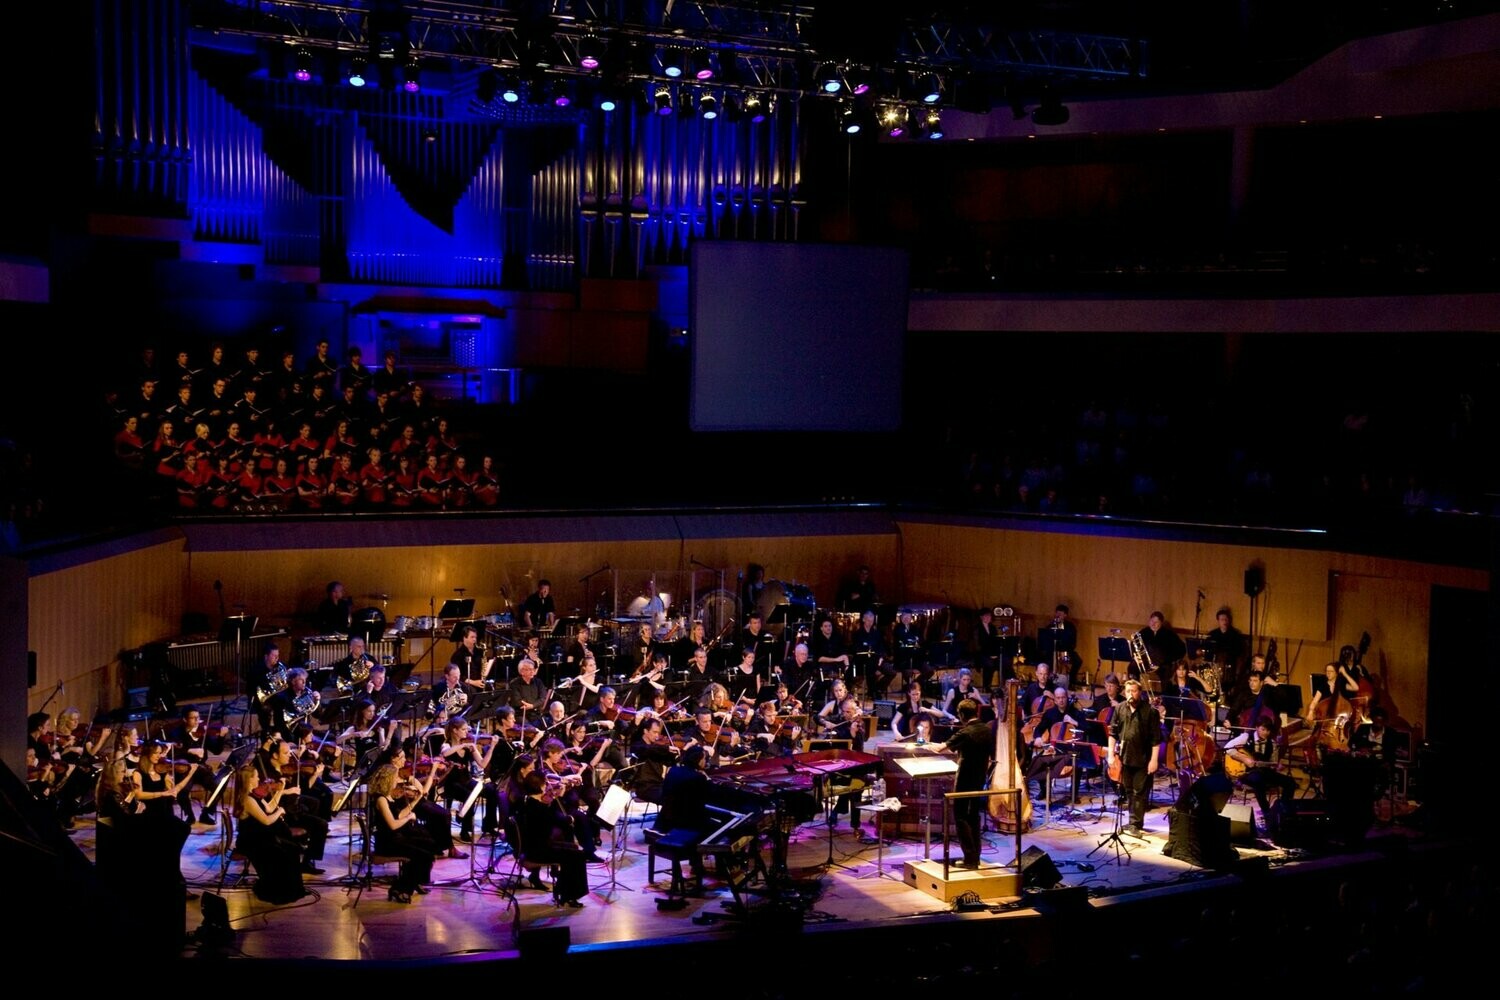 Elbow with the Hallé Orchestra: Bridgewater Hall, Manchester, England